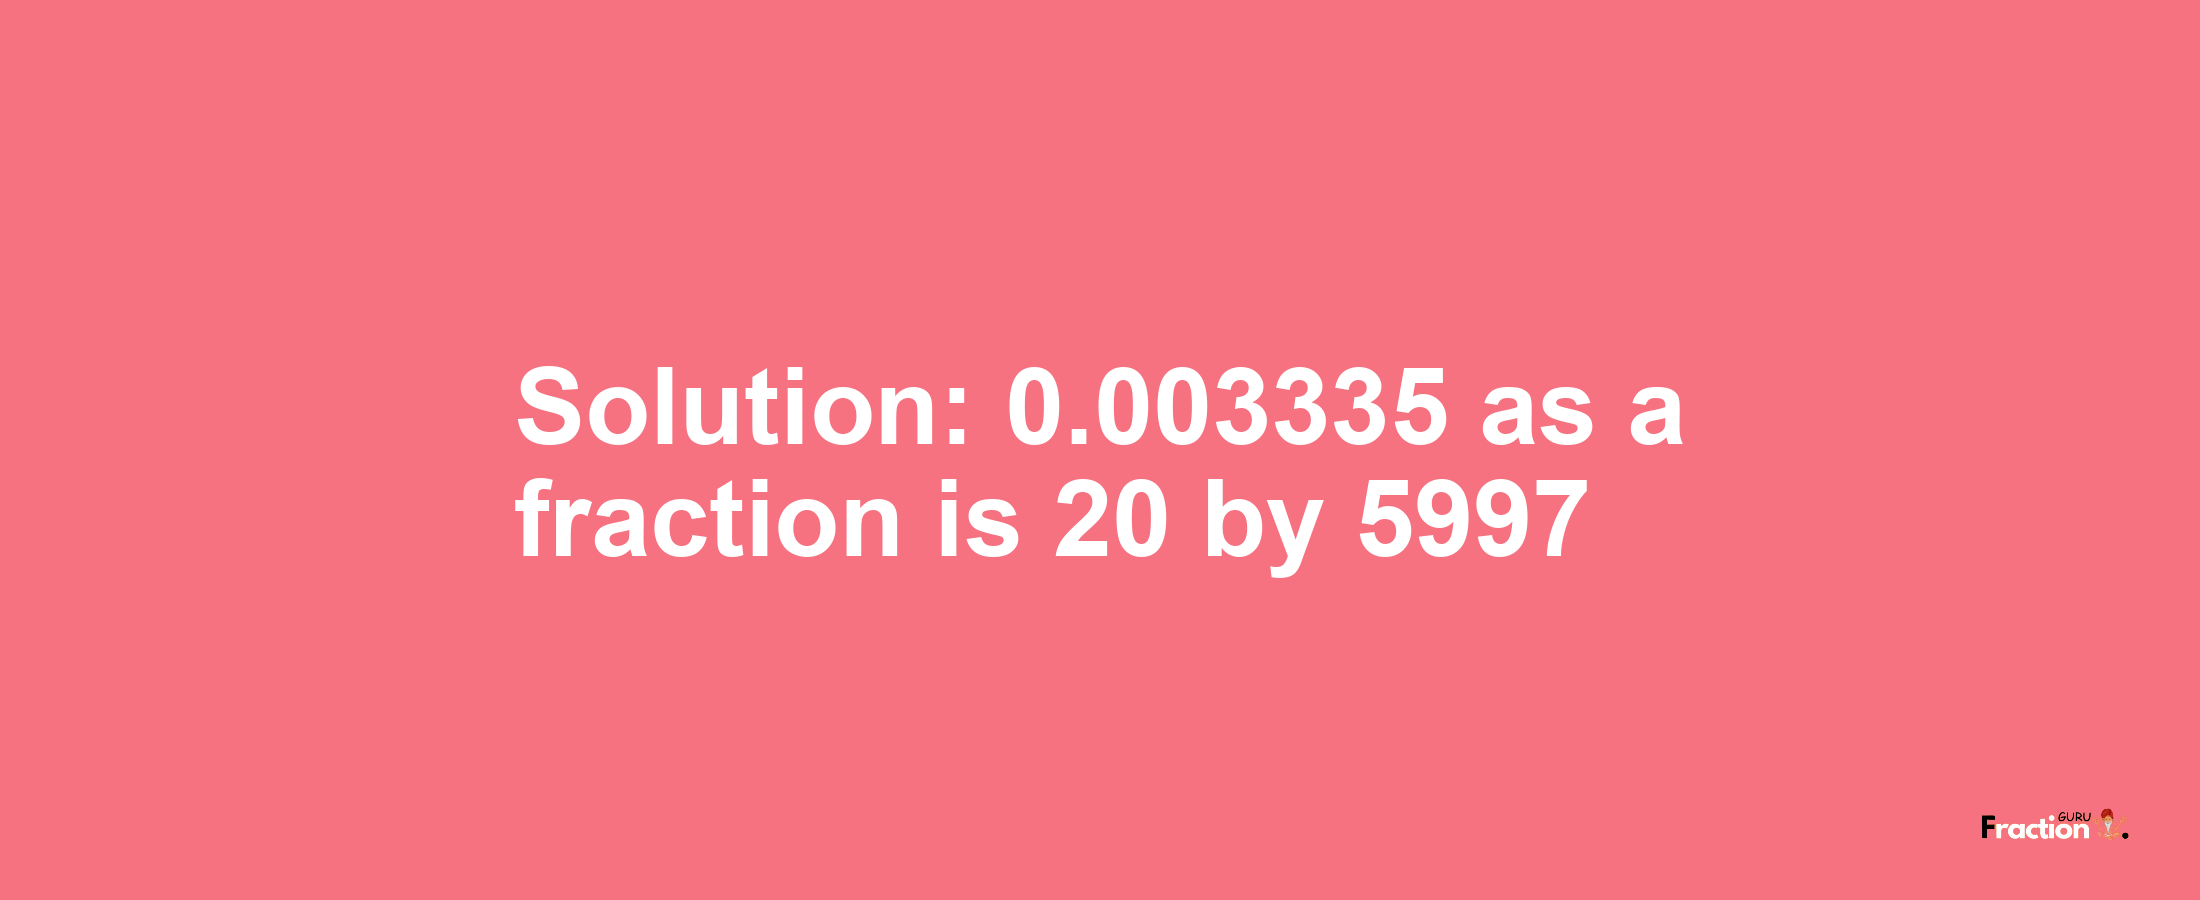 Solution:0.003335 as a fraction is 20/5997